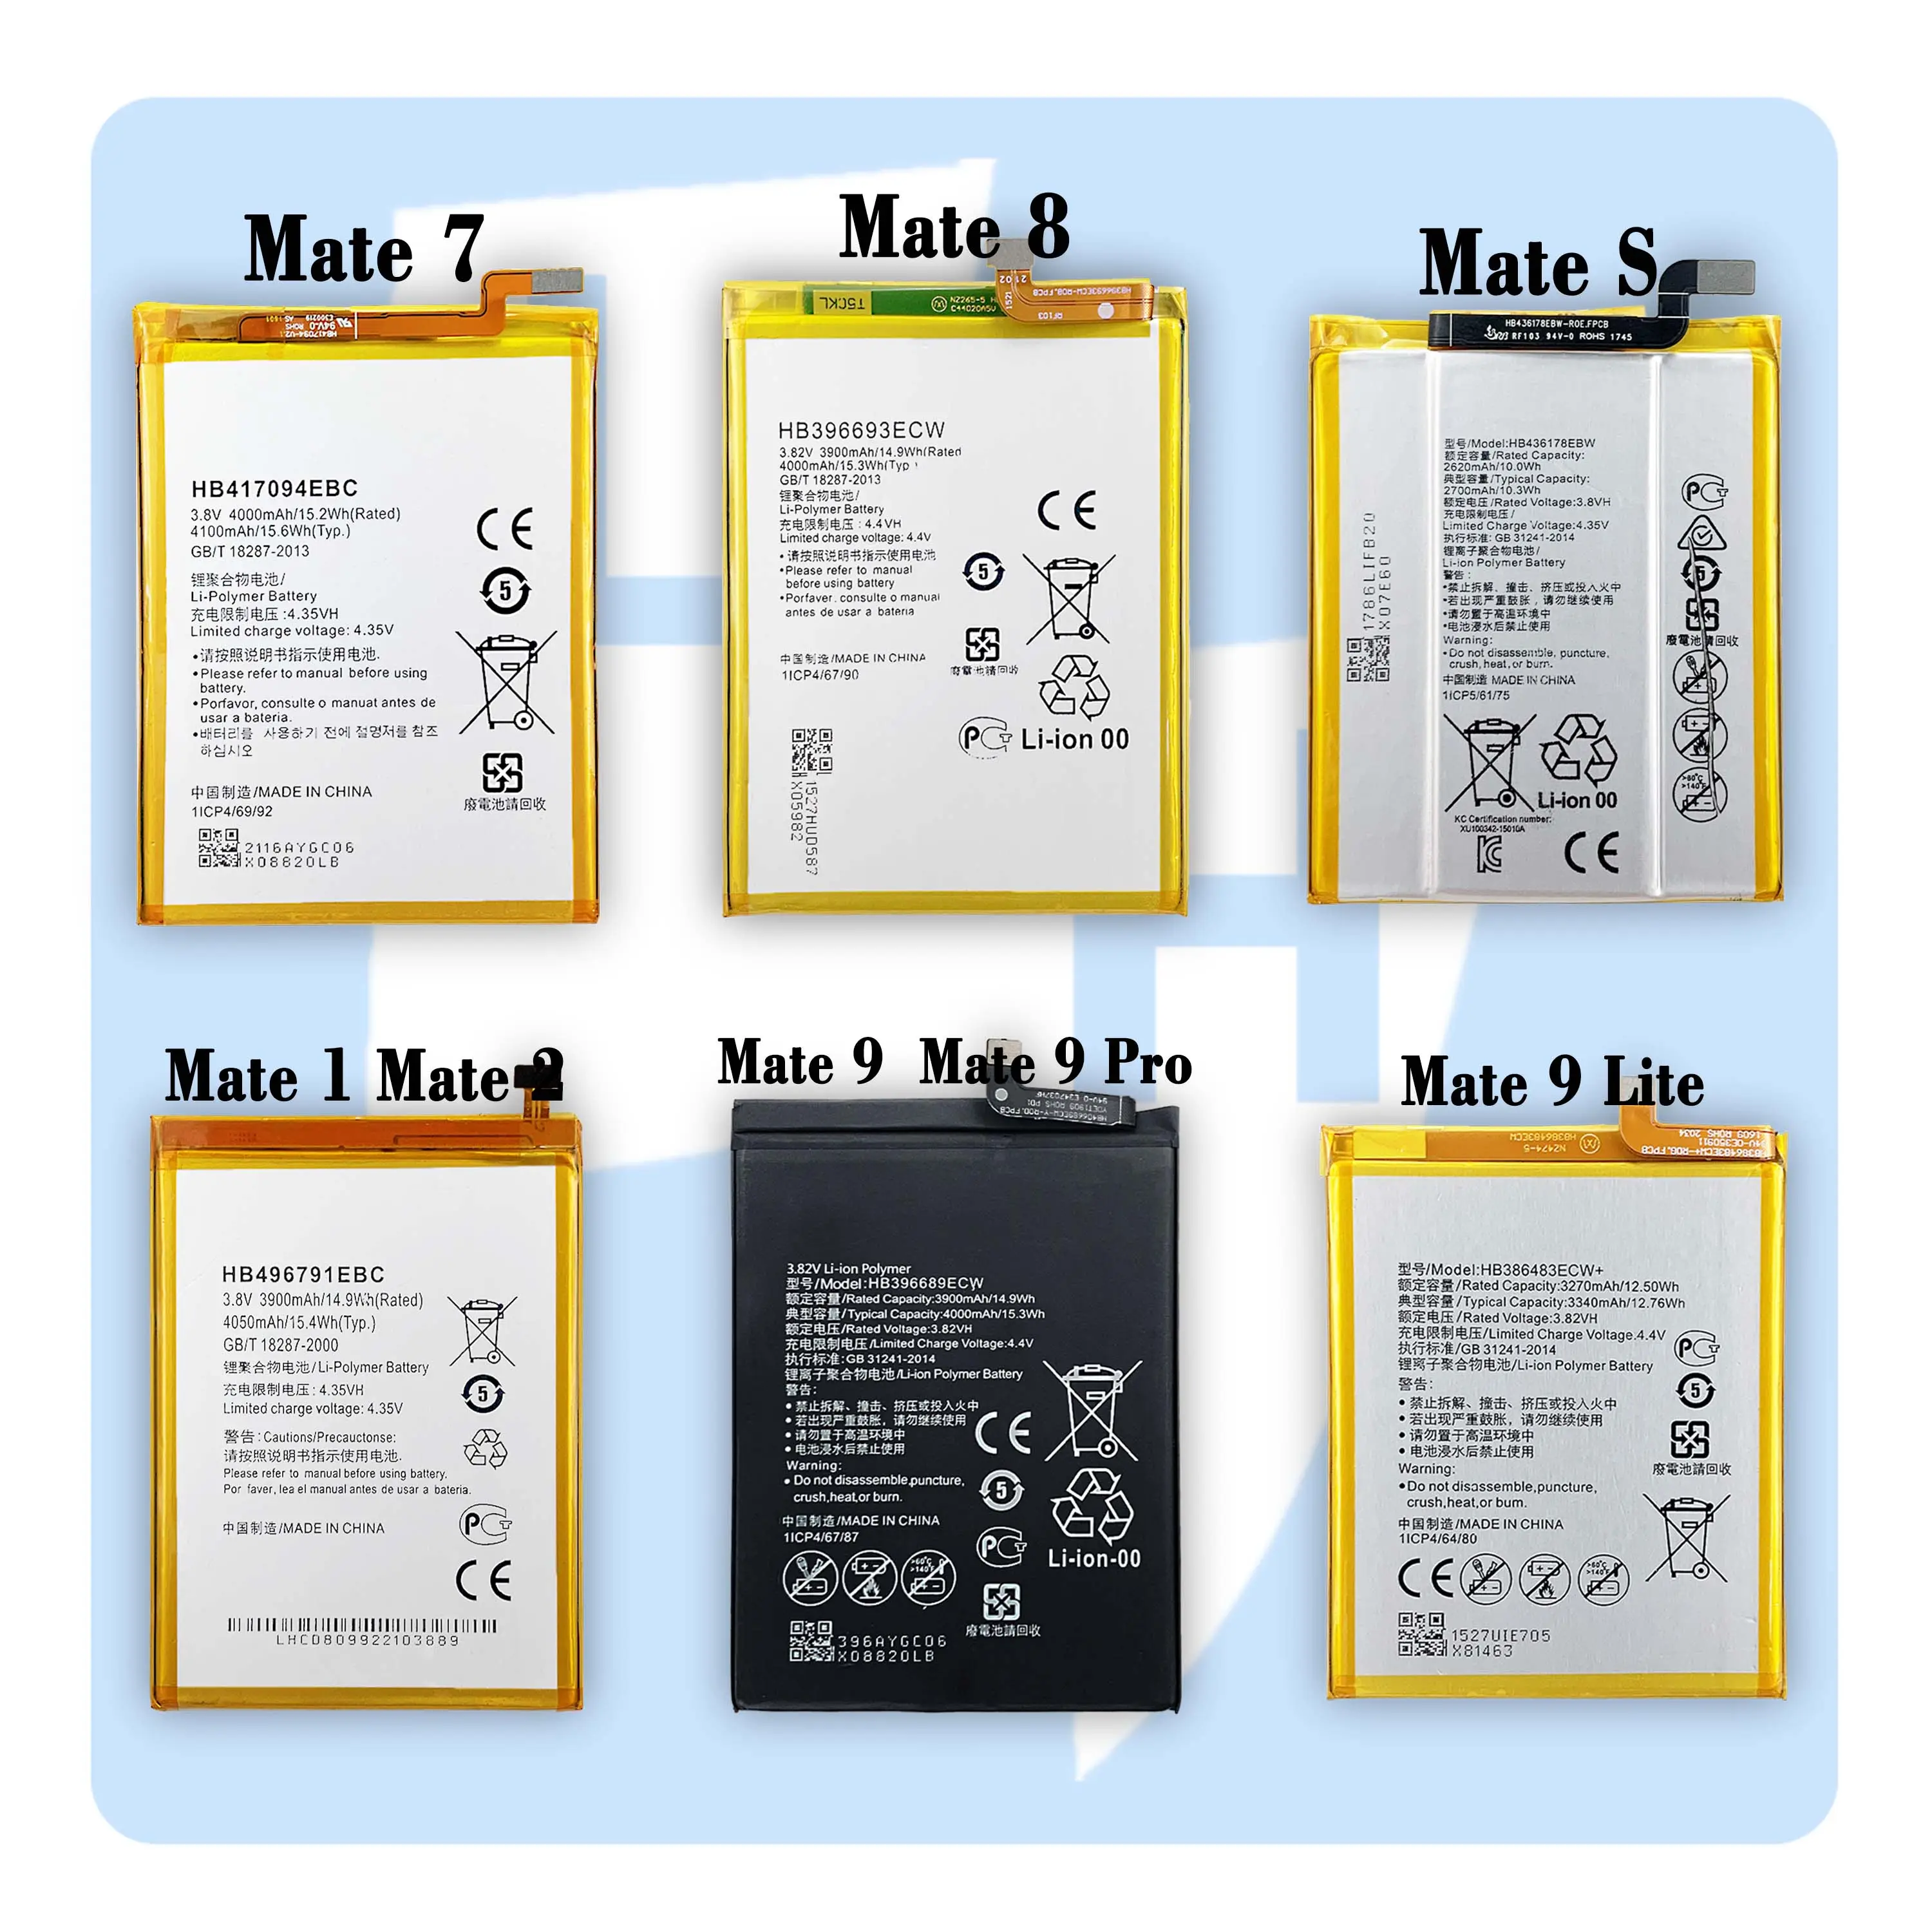 mate s mate1 mate2 mate7 mate8 mate9 9 lite mate10 mate20 mate30 mobile phone battery for huawei mate 40